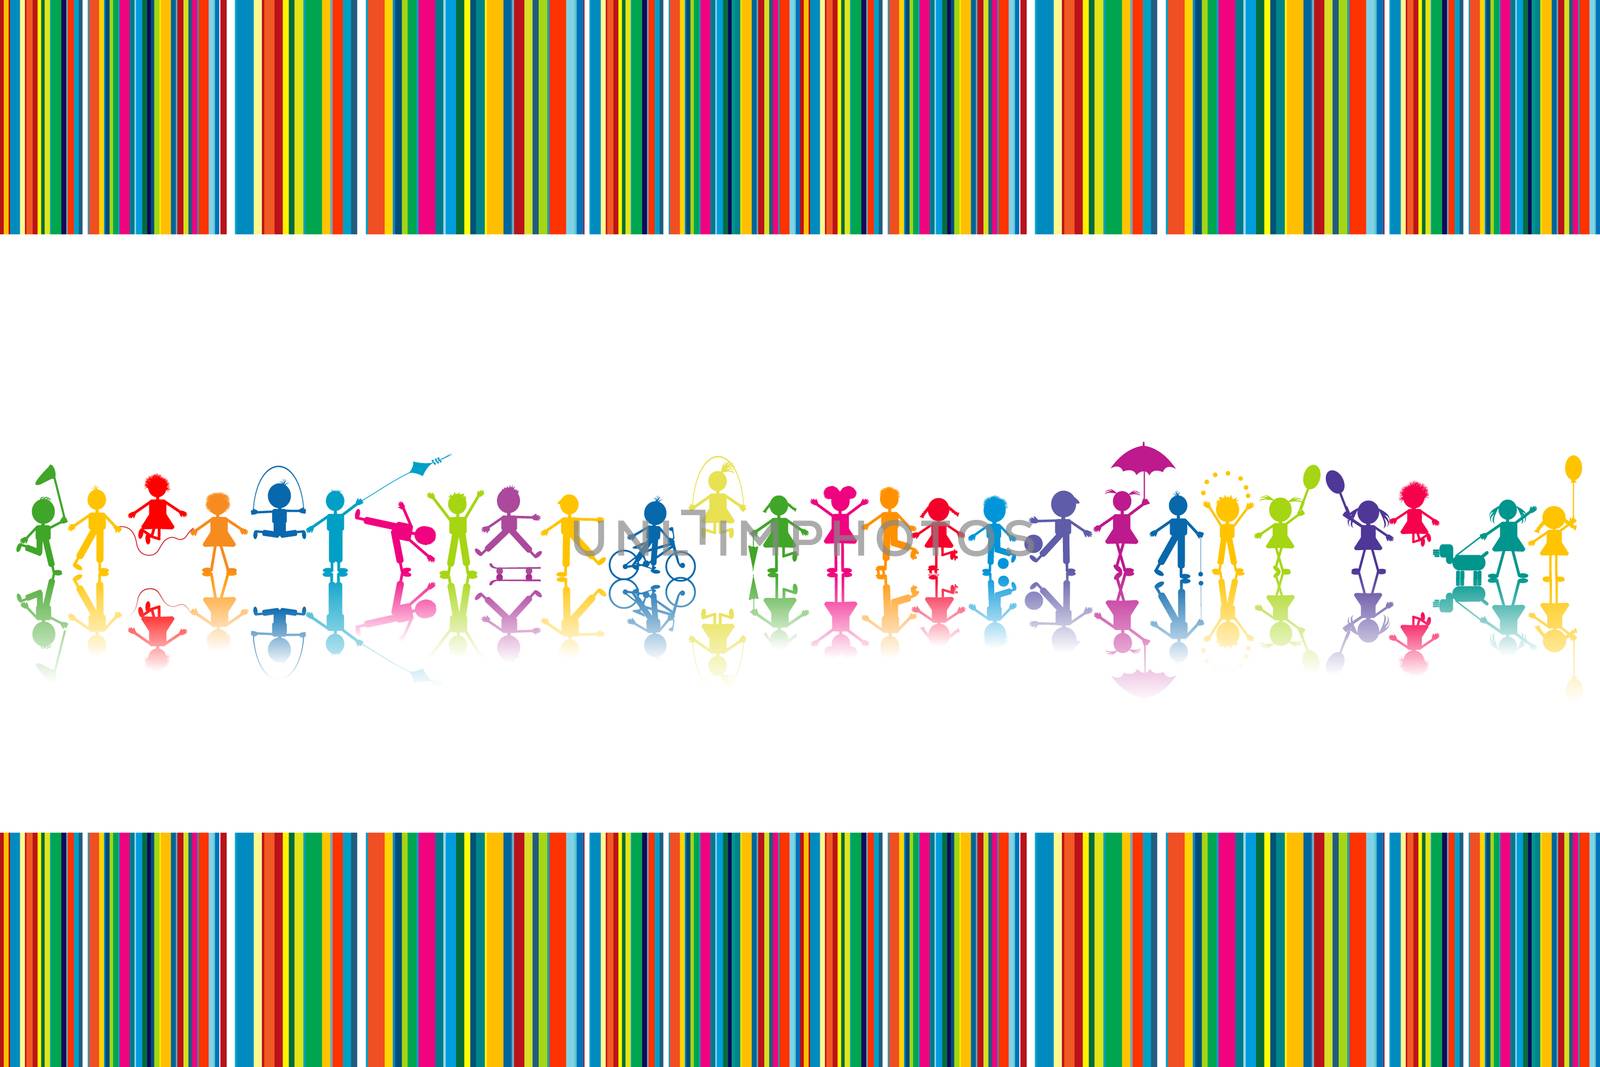 Cartoon colored children silhouettes on striped background